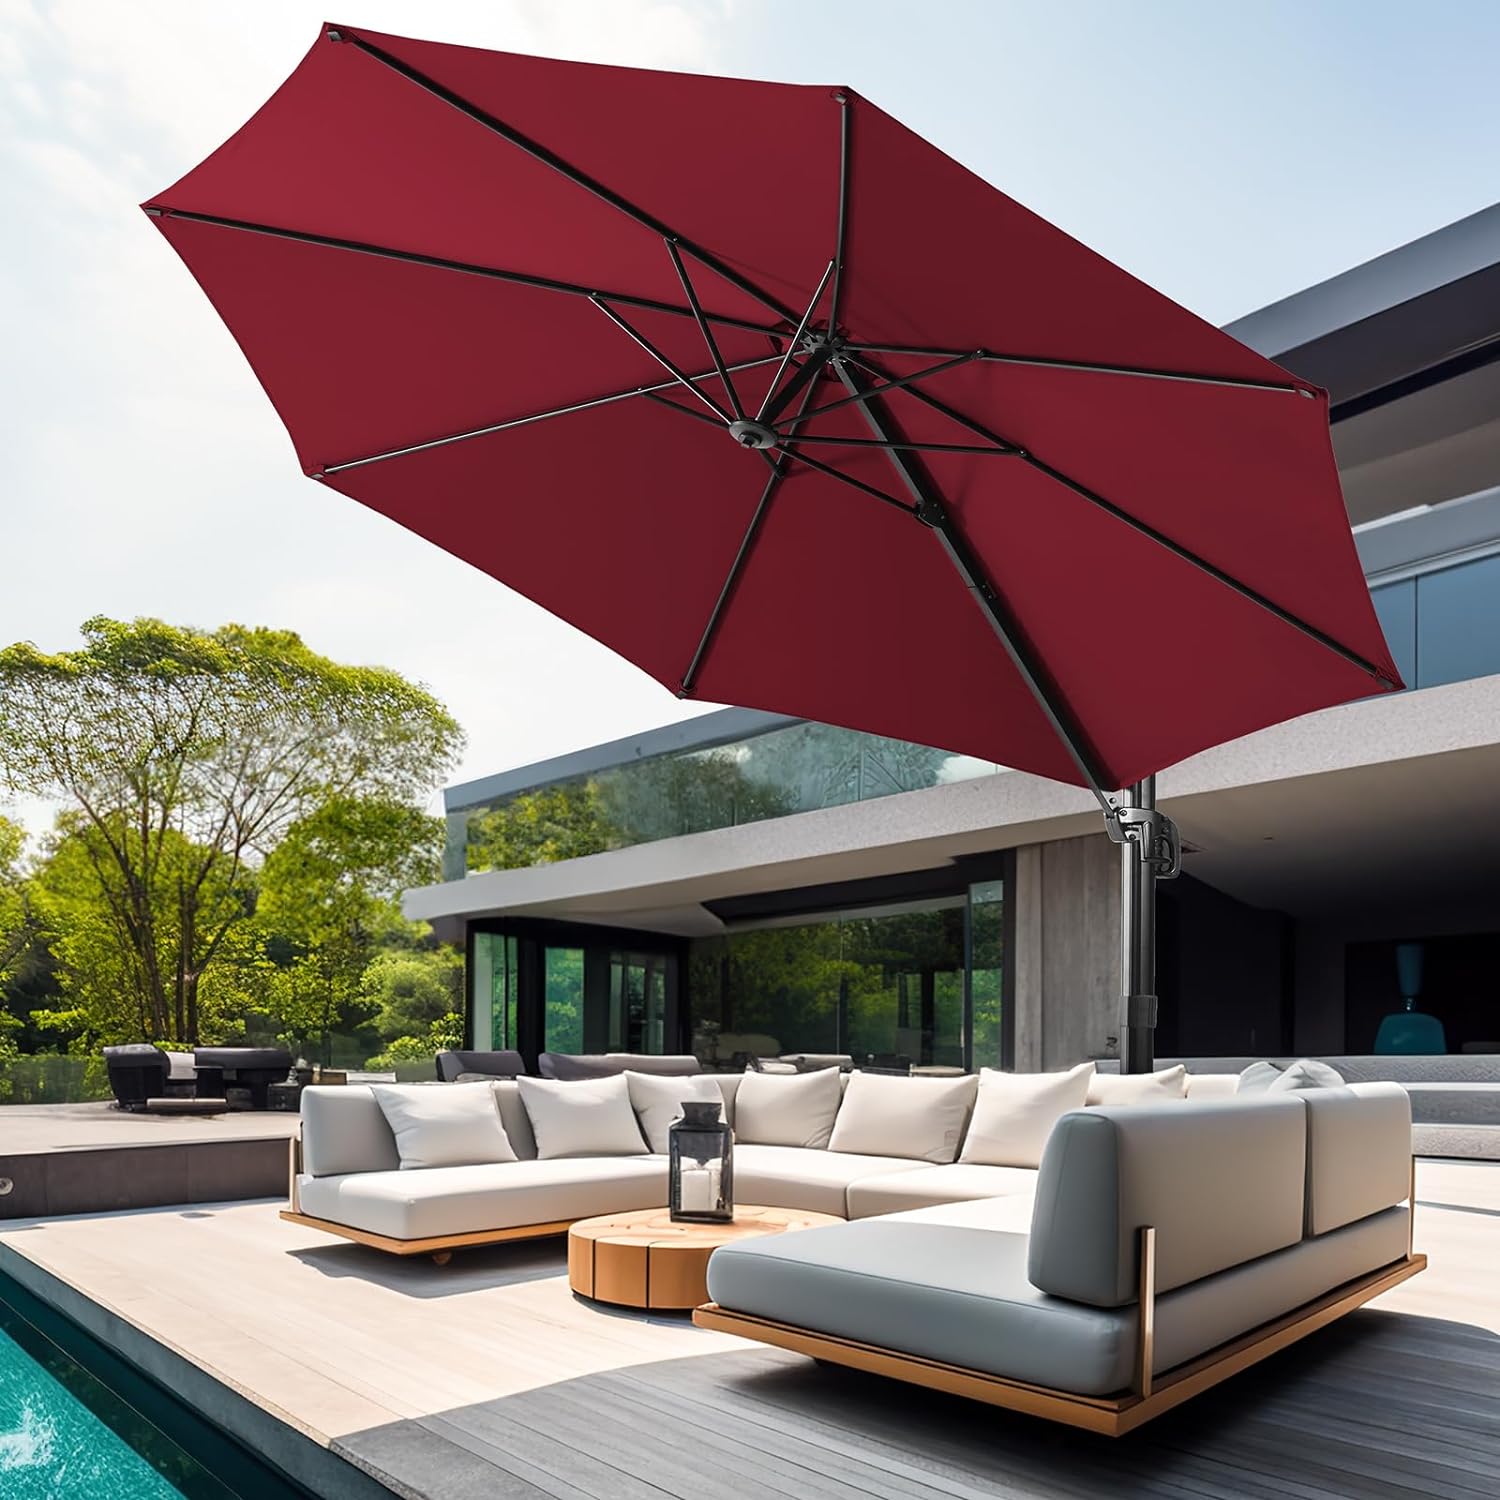 wikiwiki S Series Cantilever Patio Umbrellas 10 FT Outdoor Offset Umbrella/Fade & UV Resistant Solution-dyed Fabric, 5 Level 360 Rotation Aluminum Pole for Deck Pool Backyard Garden, Burgundy